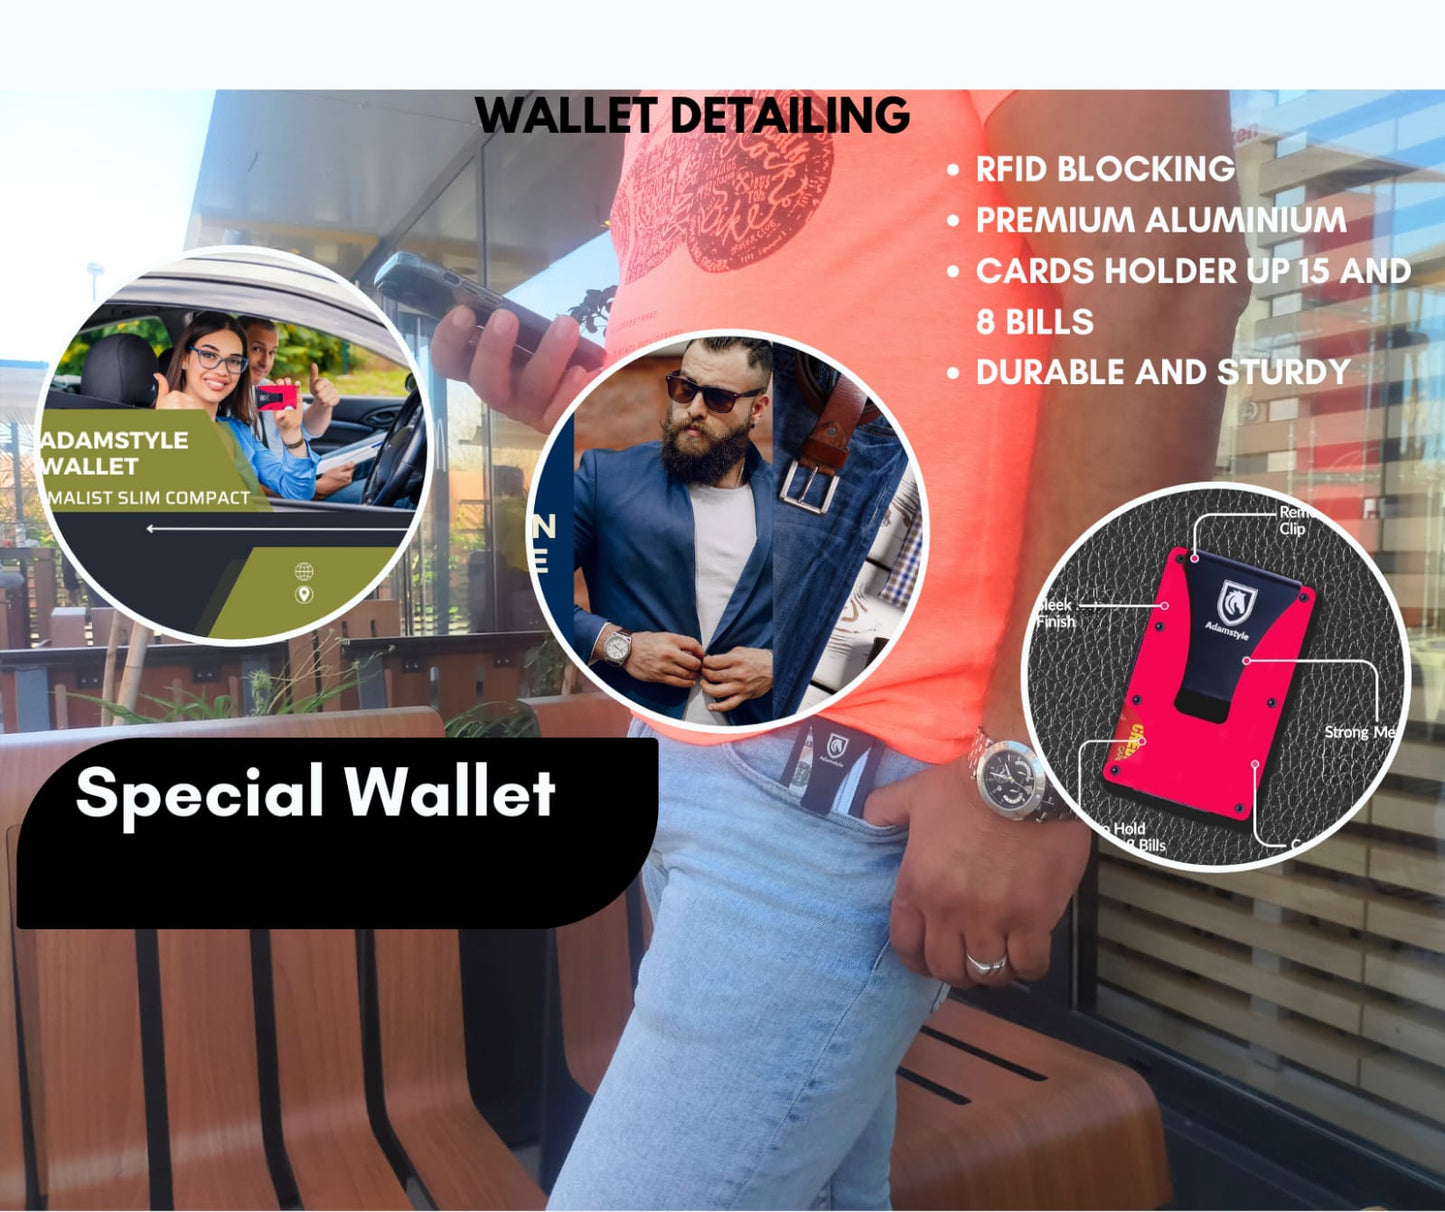 Wallet Business for Men RFID Blocking Security, Slim Metal Aluminum Elegant with Money Clip, Card Holder 15 Cards plus Cash with Gift Box